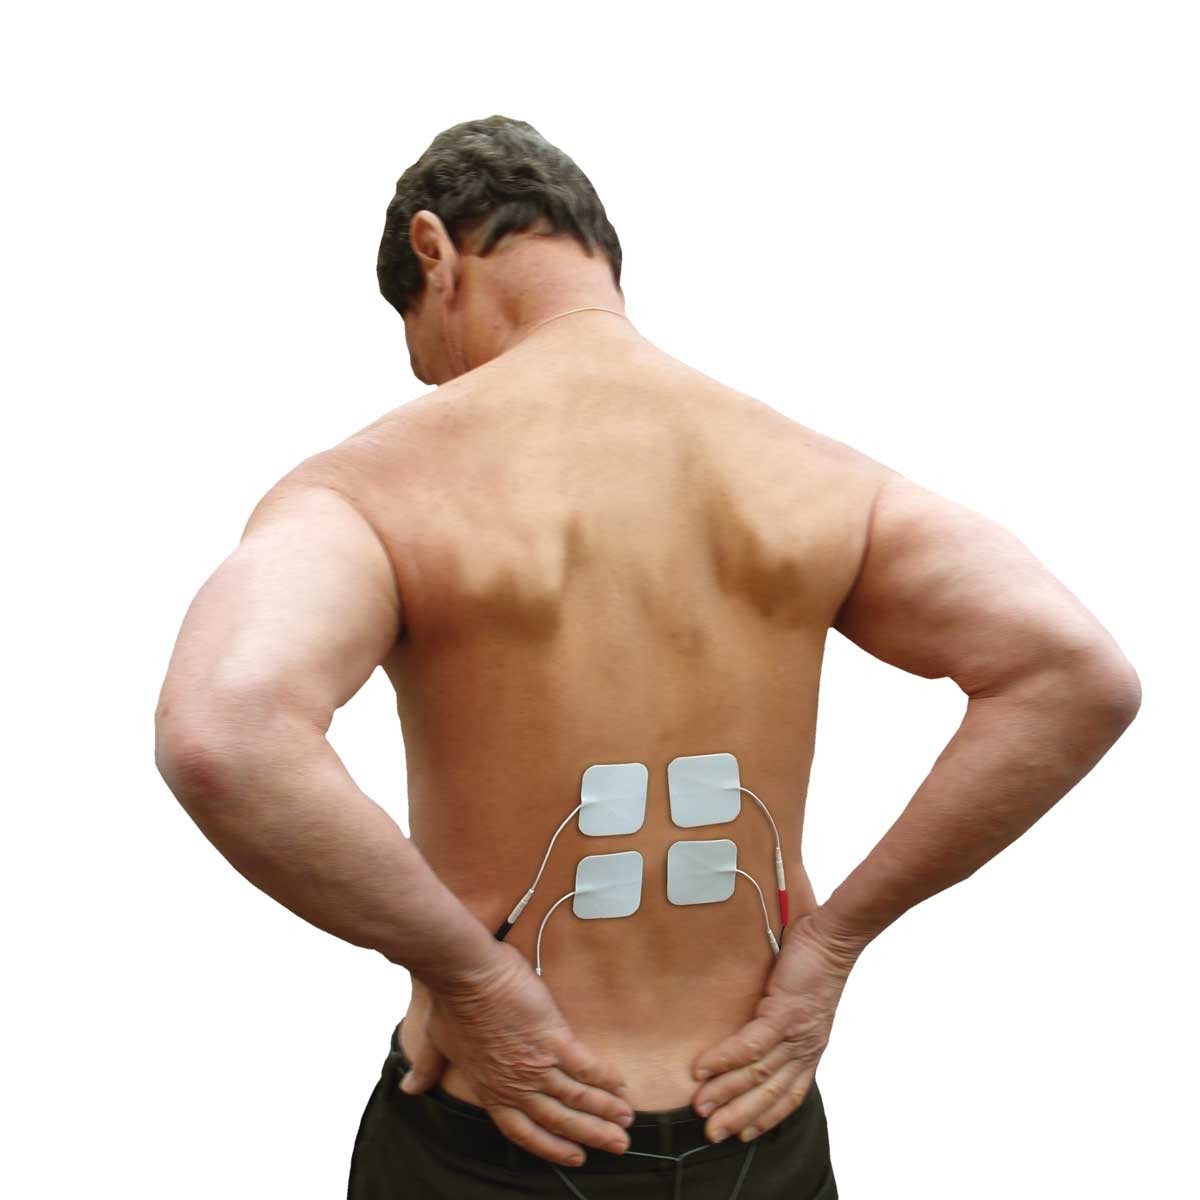 Reduce muscle spasm or knots - The picture shows a man holding his lower back, top off to show the placement of lumbar tens machine electrodes - 4 are placed on his lower back